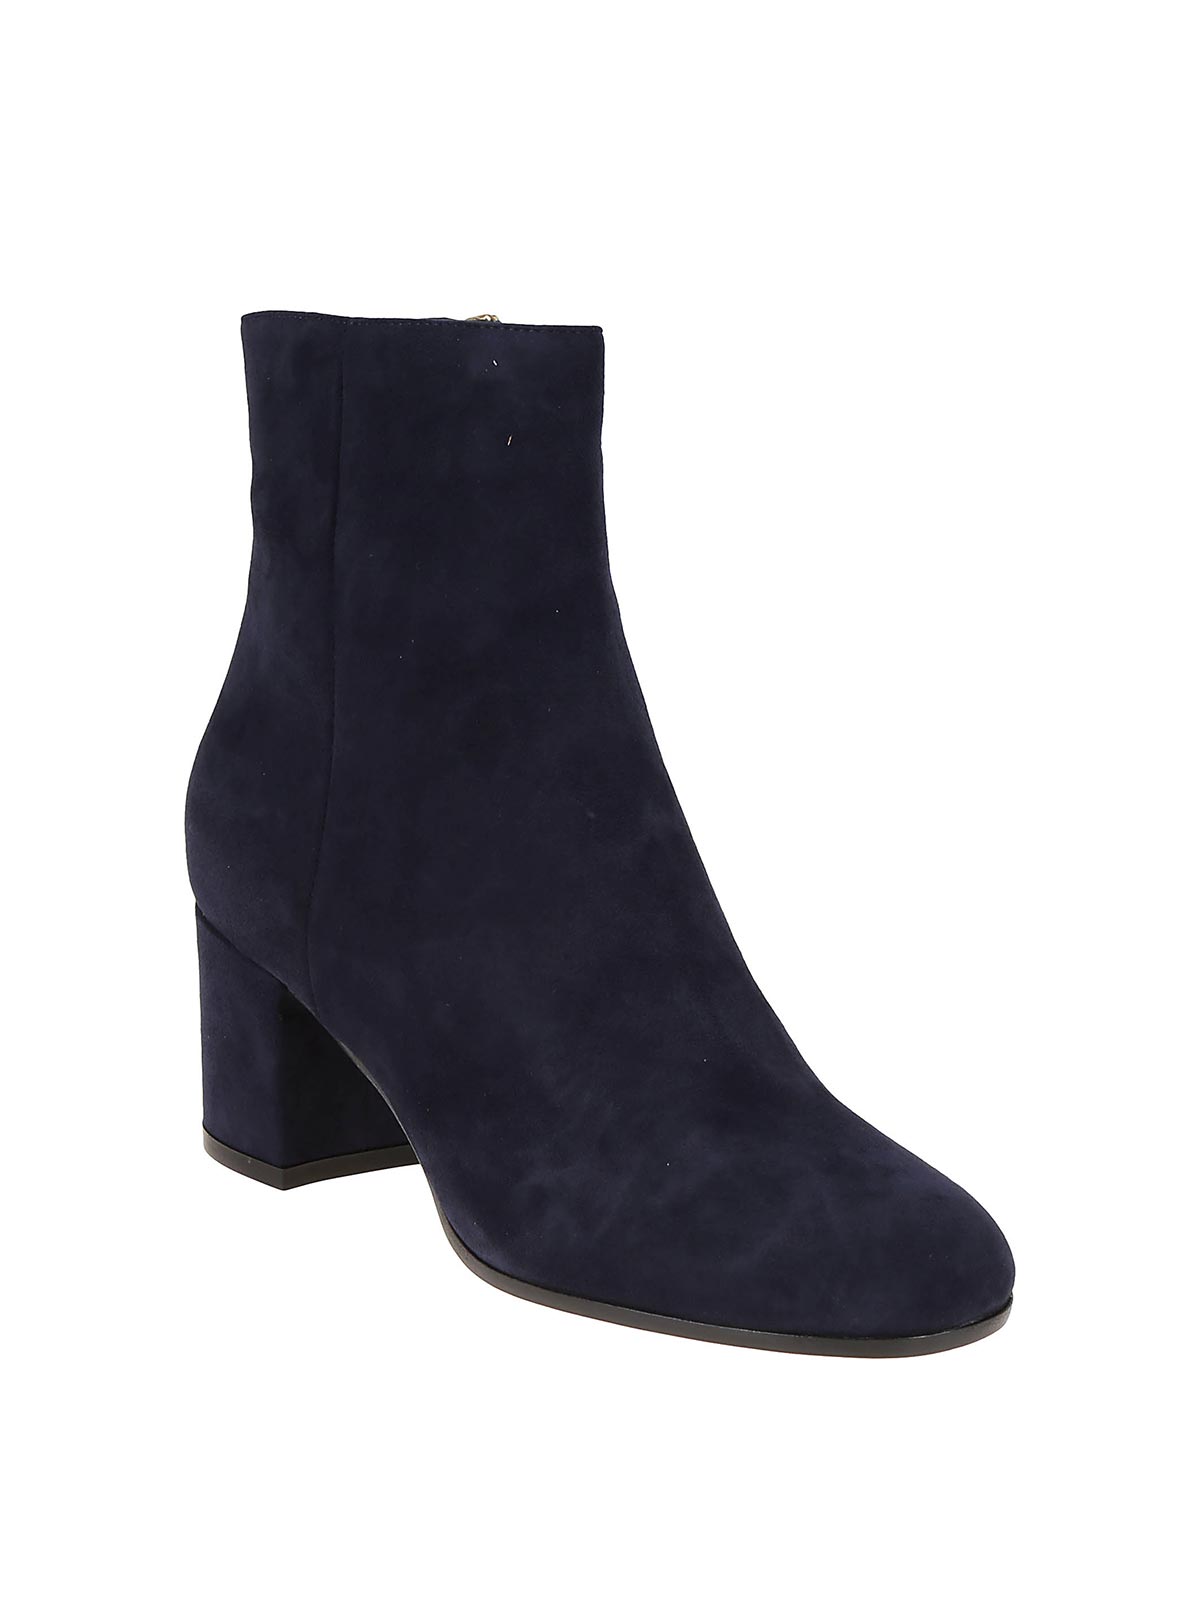 Ankle Boots for Women MARGAUX MID BOOTIE